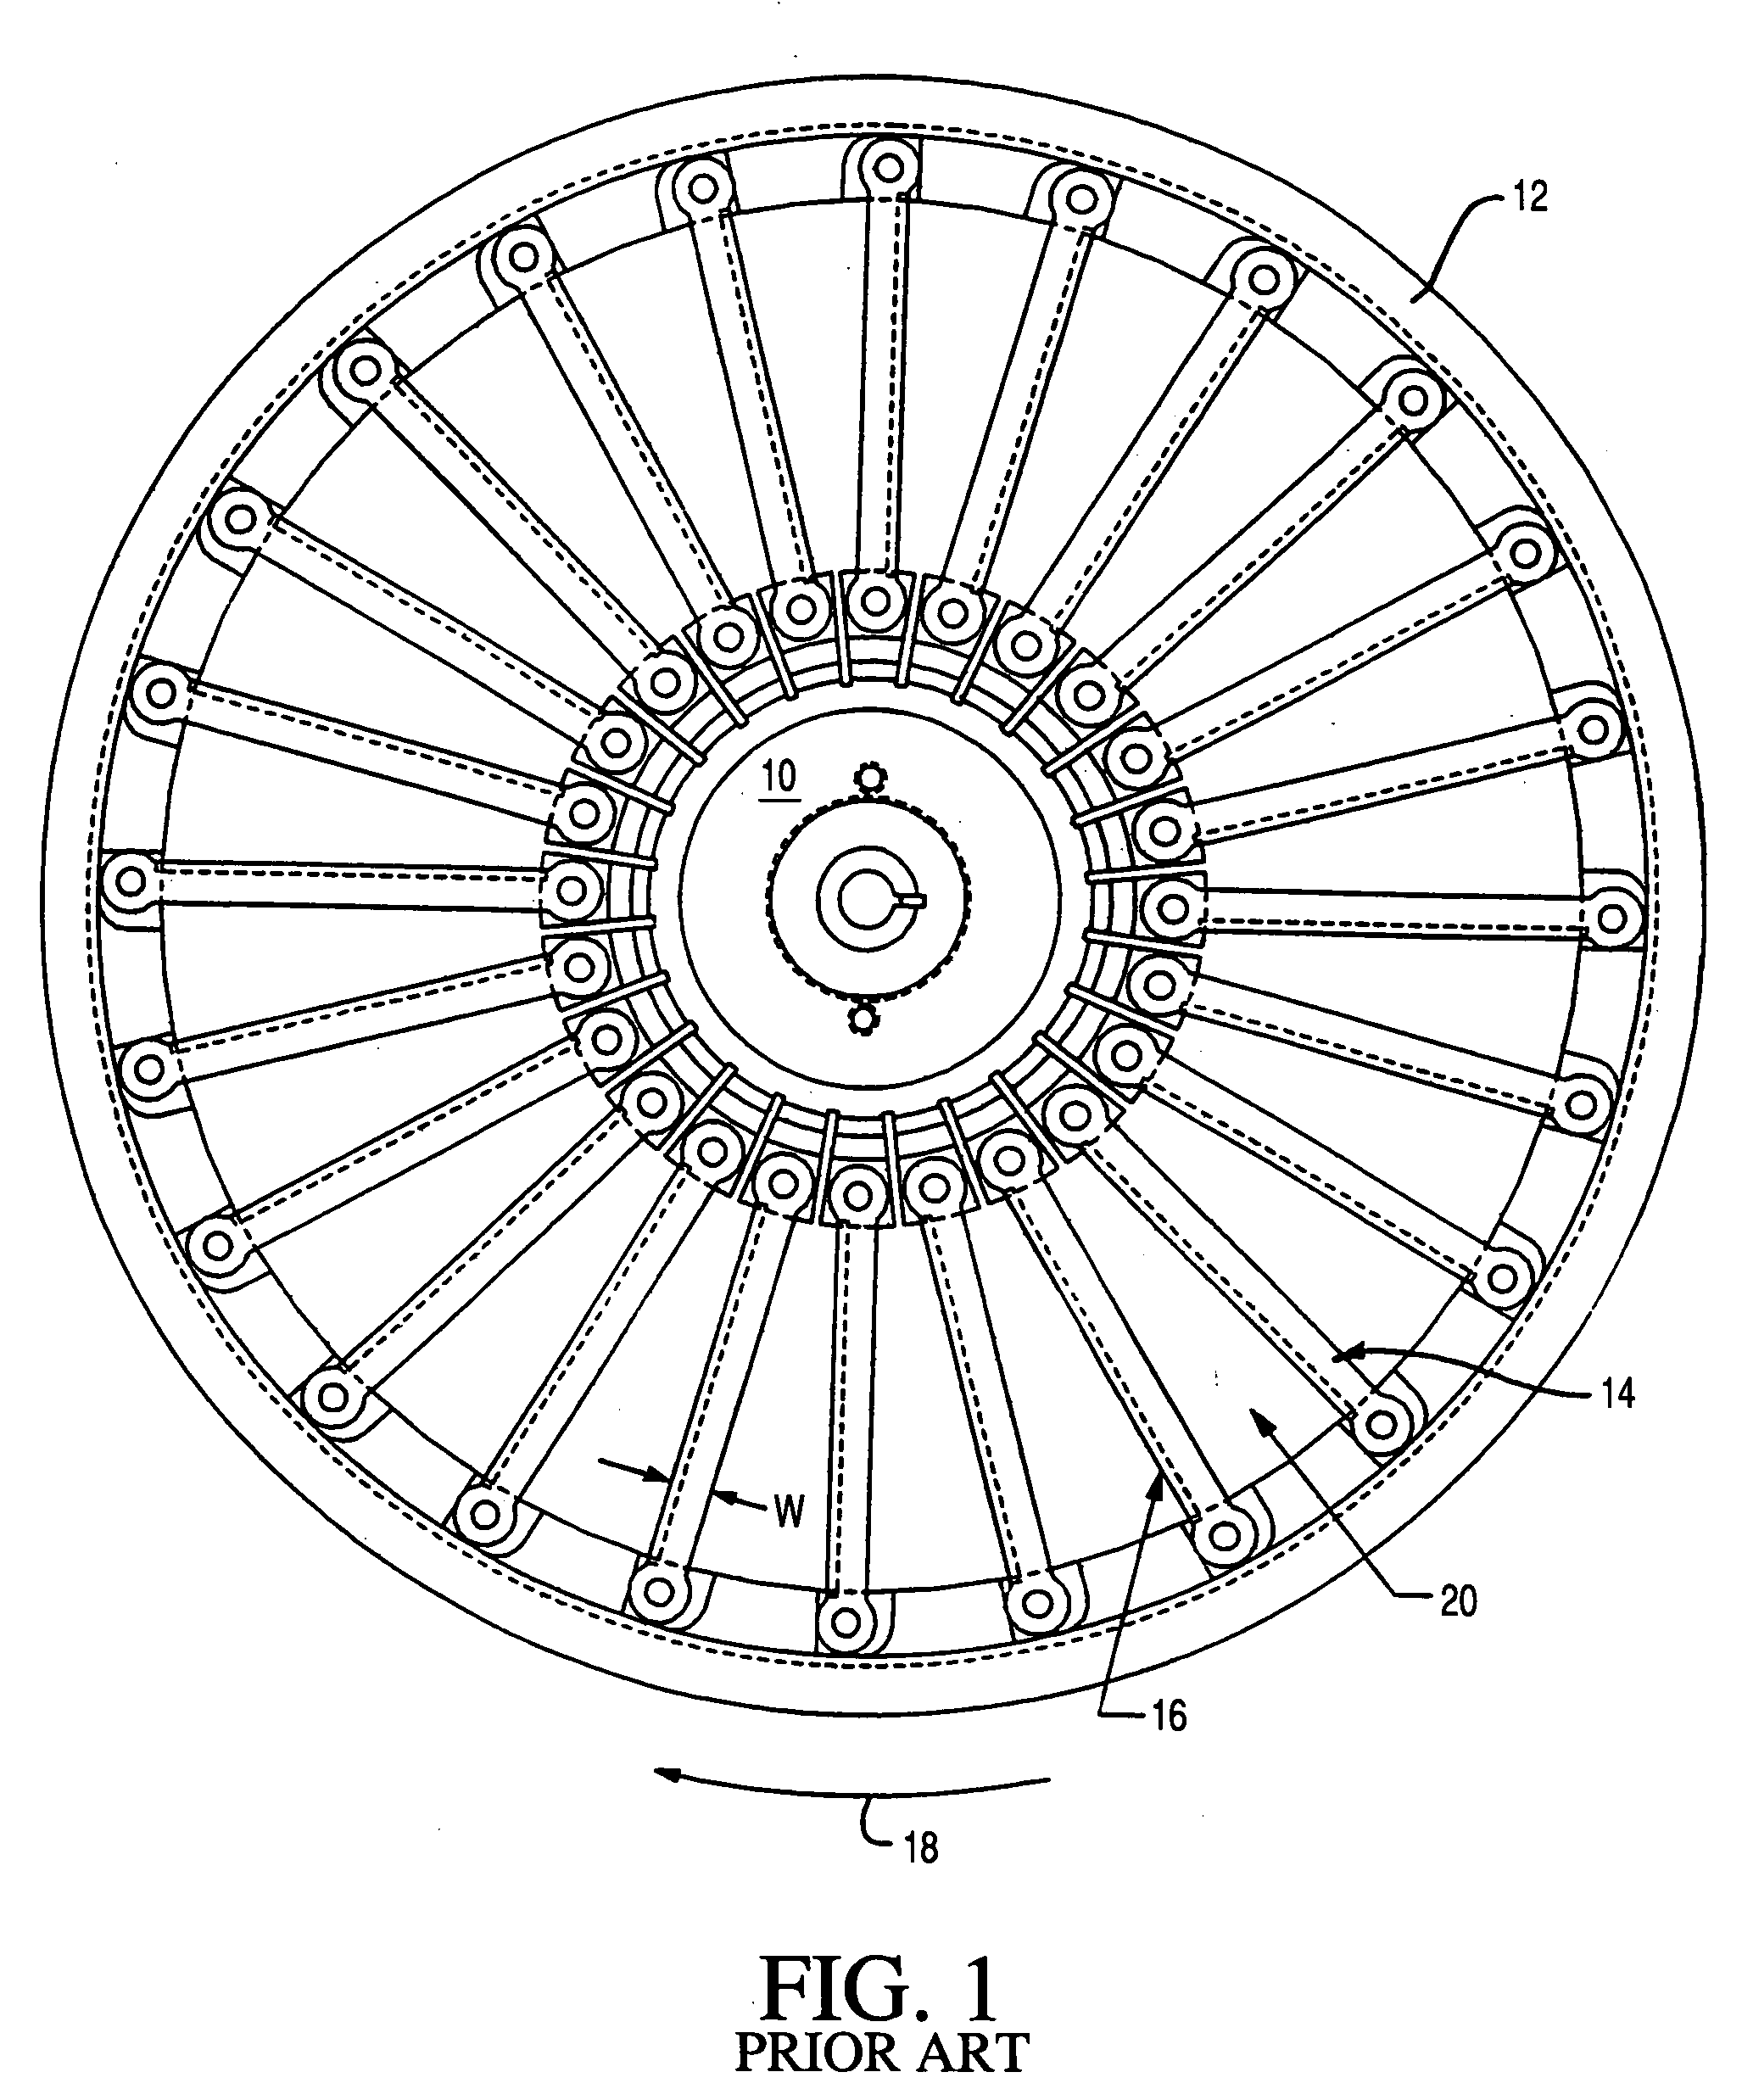 Knife arrangement for minimizing feathering during high speed cutting of food products